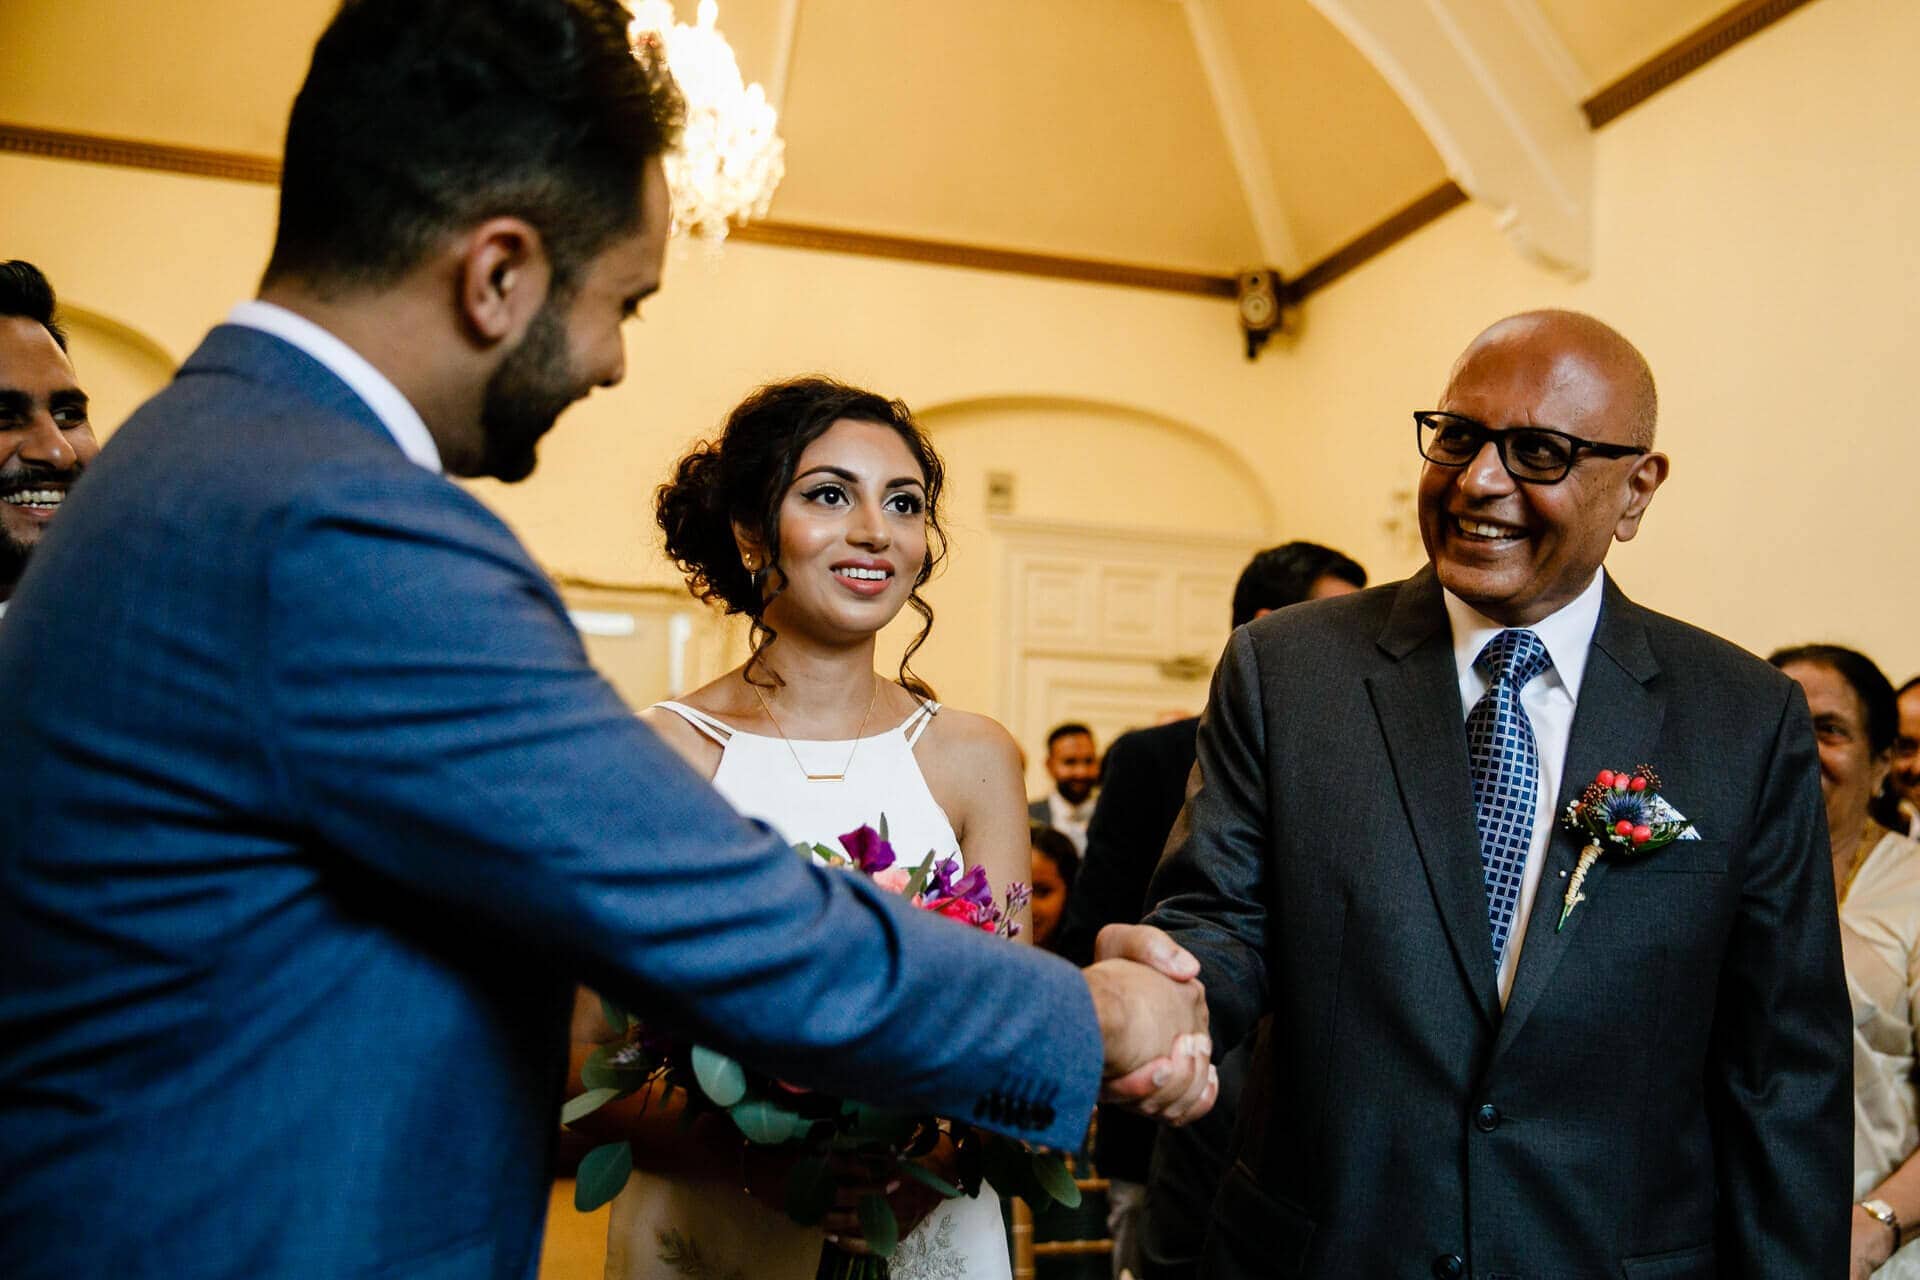 Father of the bride shaking groom's hand